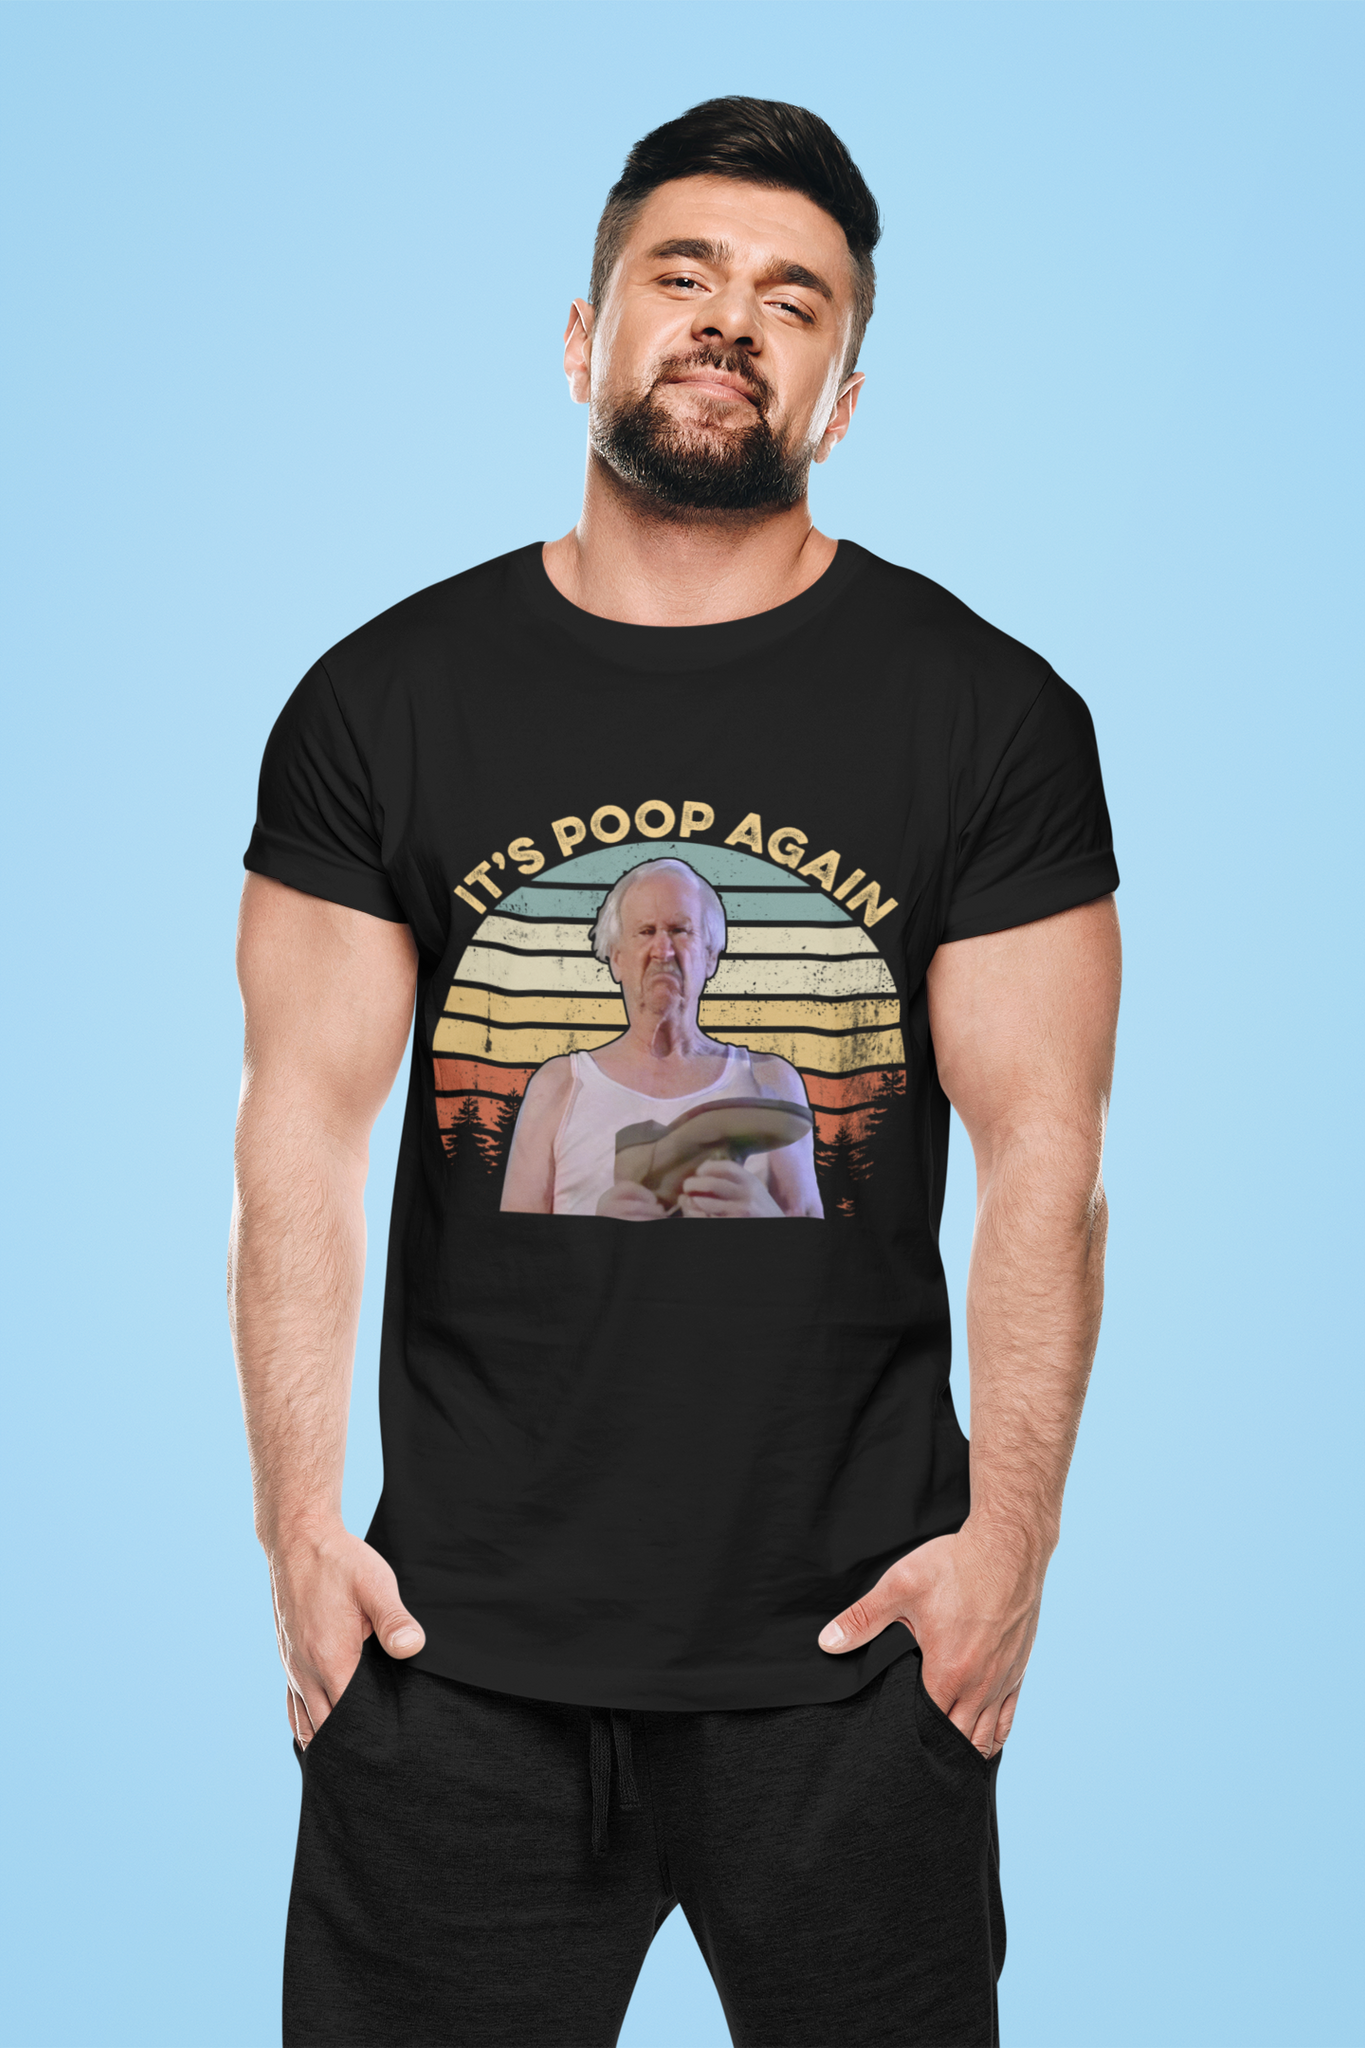 Billy Madison Comedy Film T Shirt, Ted Old Man Clemens T Shirt, Its Poop Again Tshirt